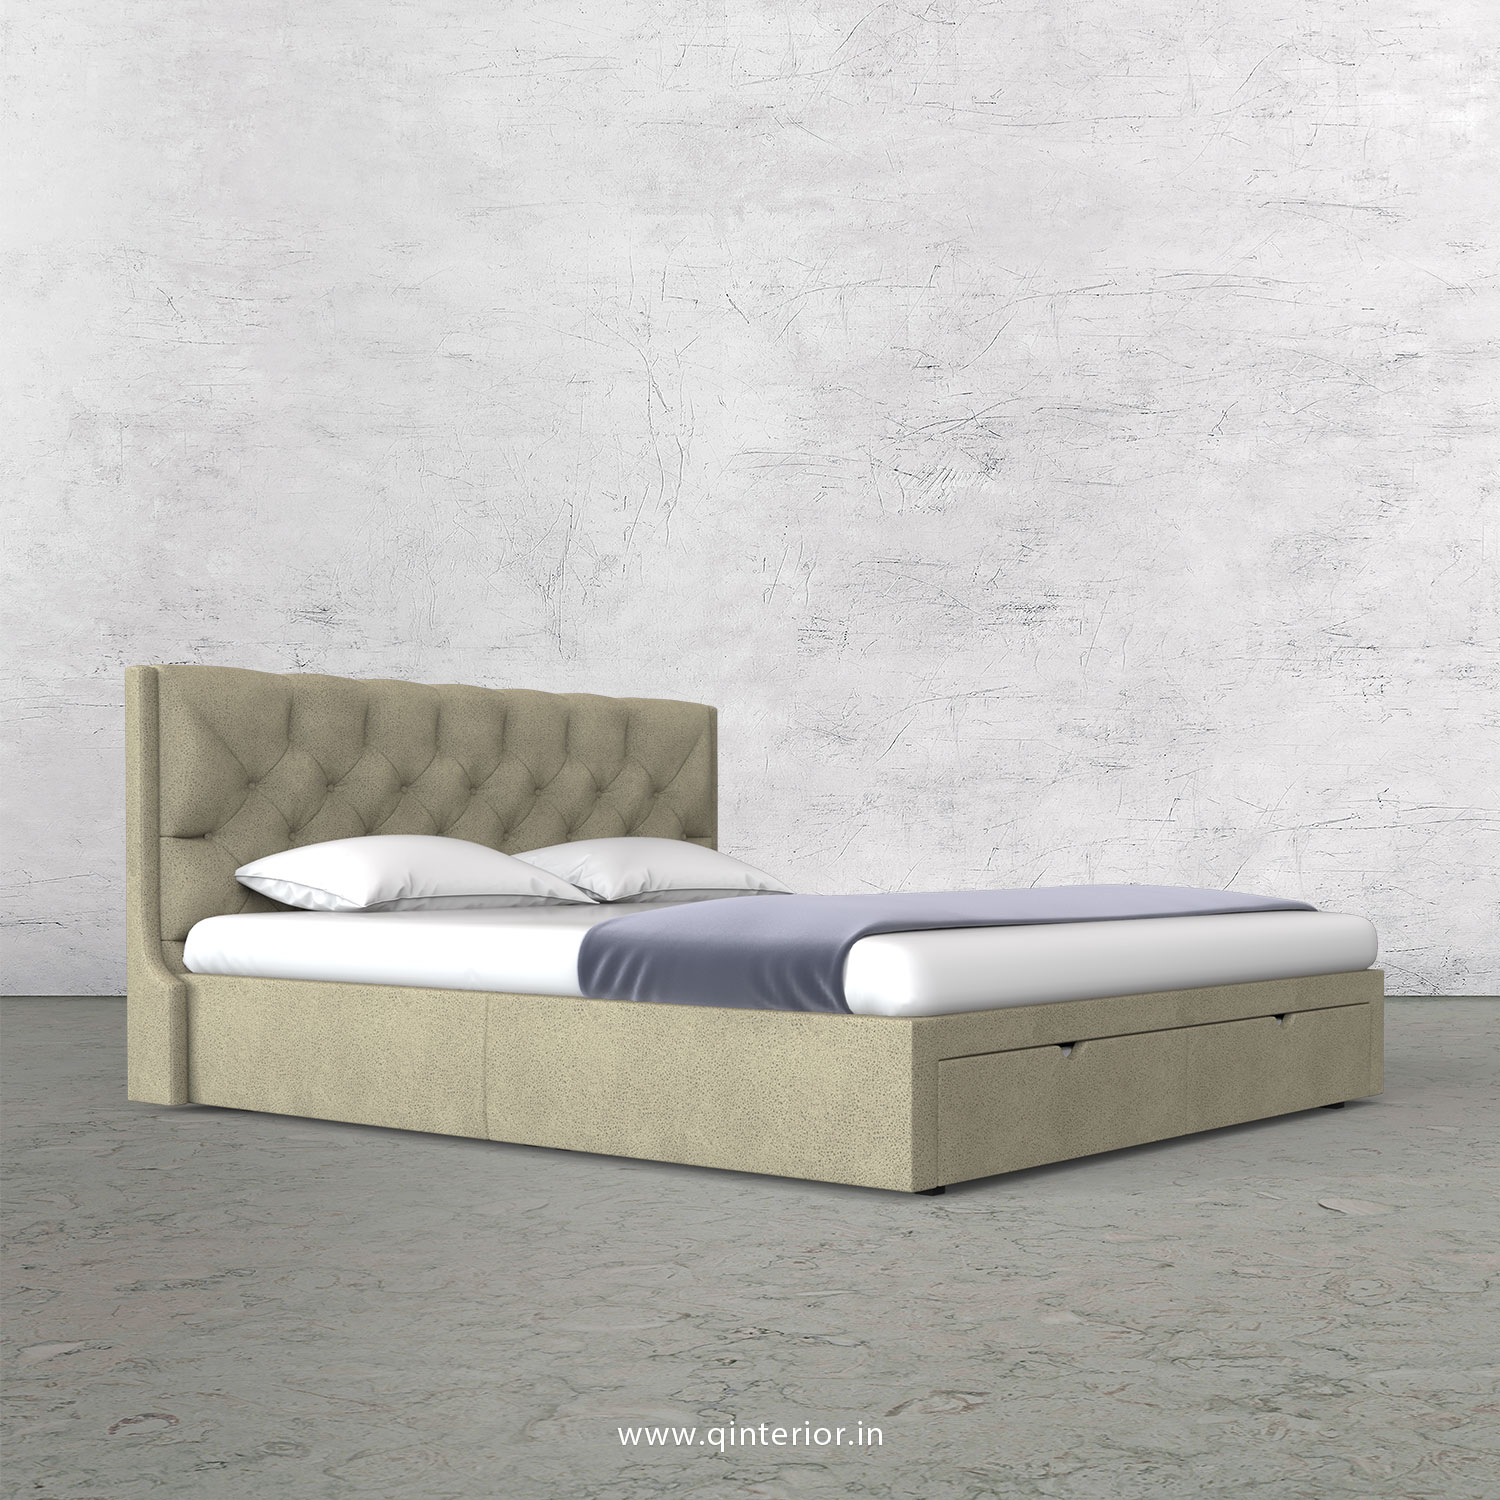 Scorpius Queen Storage Bed in Fab Leather Fabric - QBD001 FL10